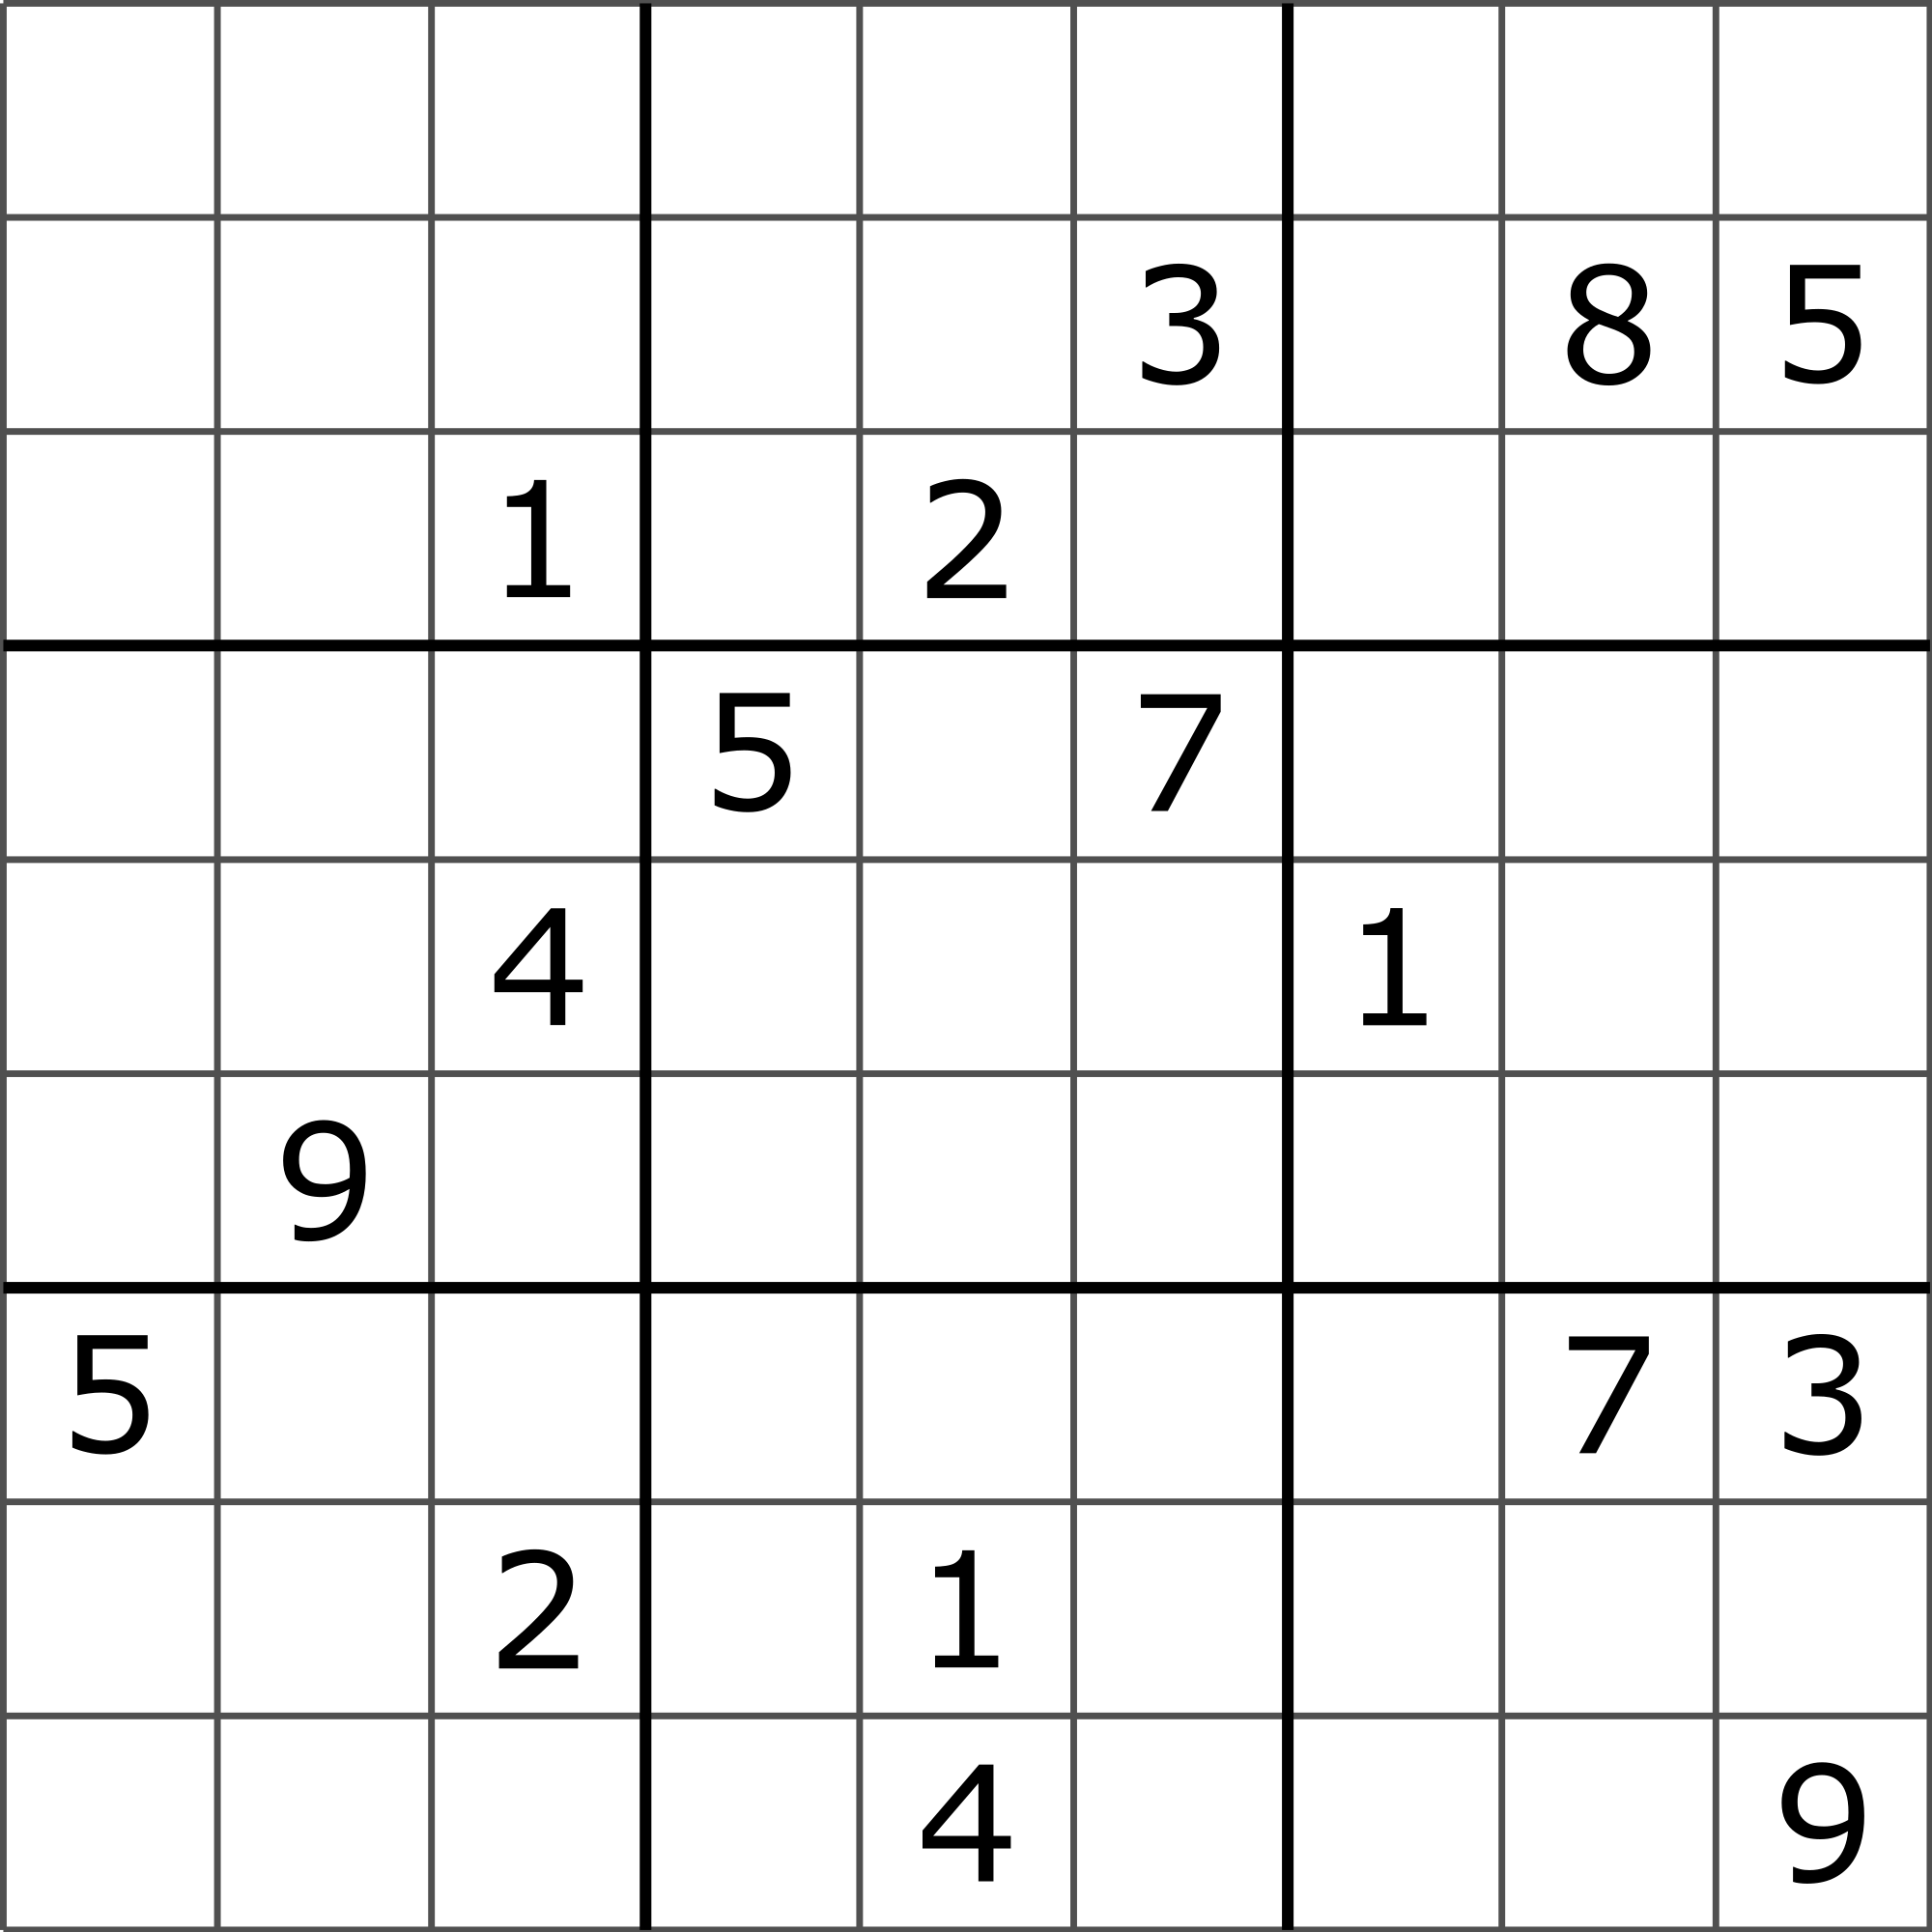 File:Sudoku puzzle hard for brute force.svg - Wikimedia Commons